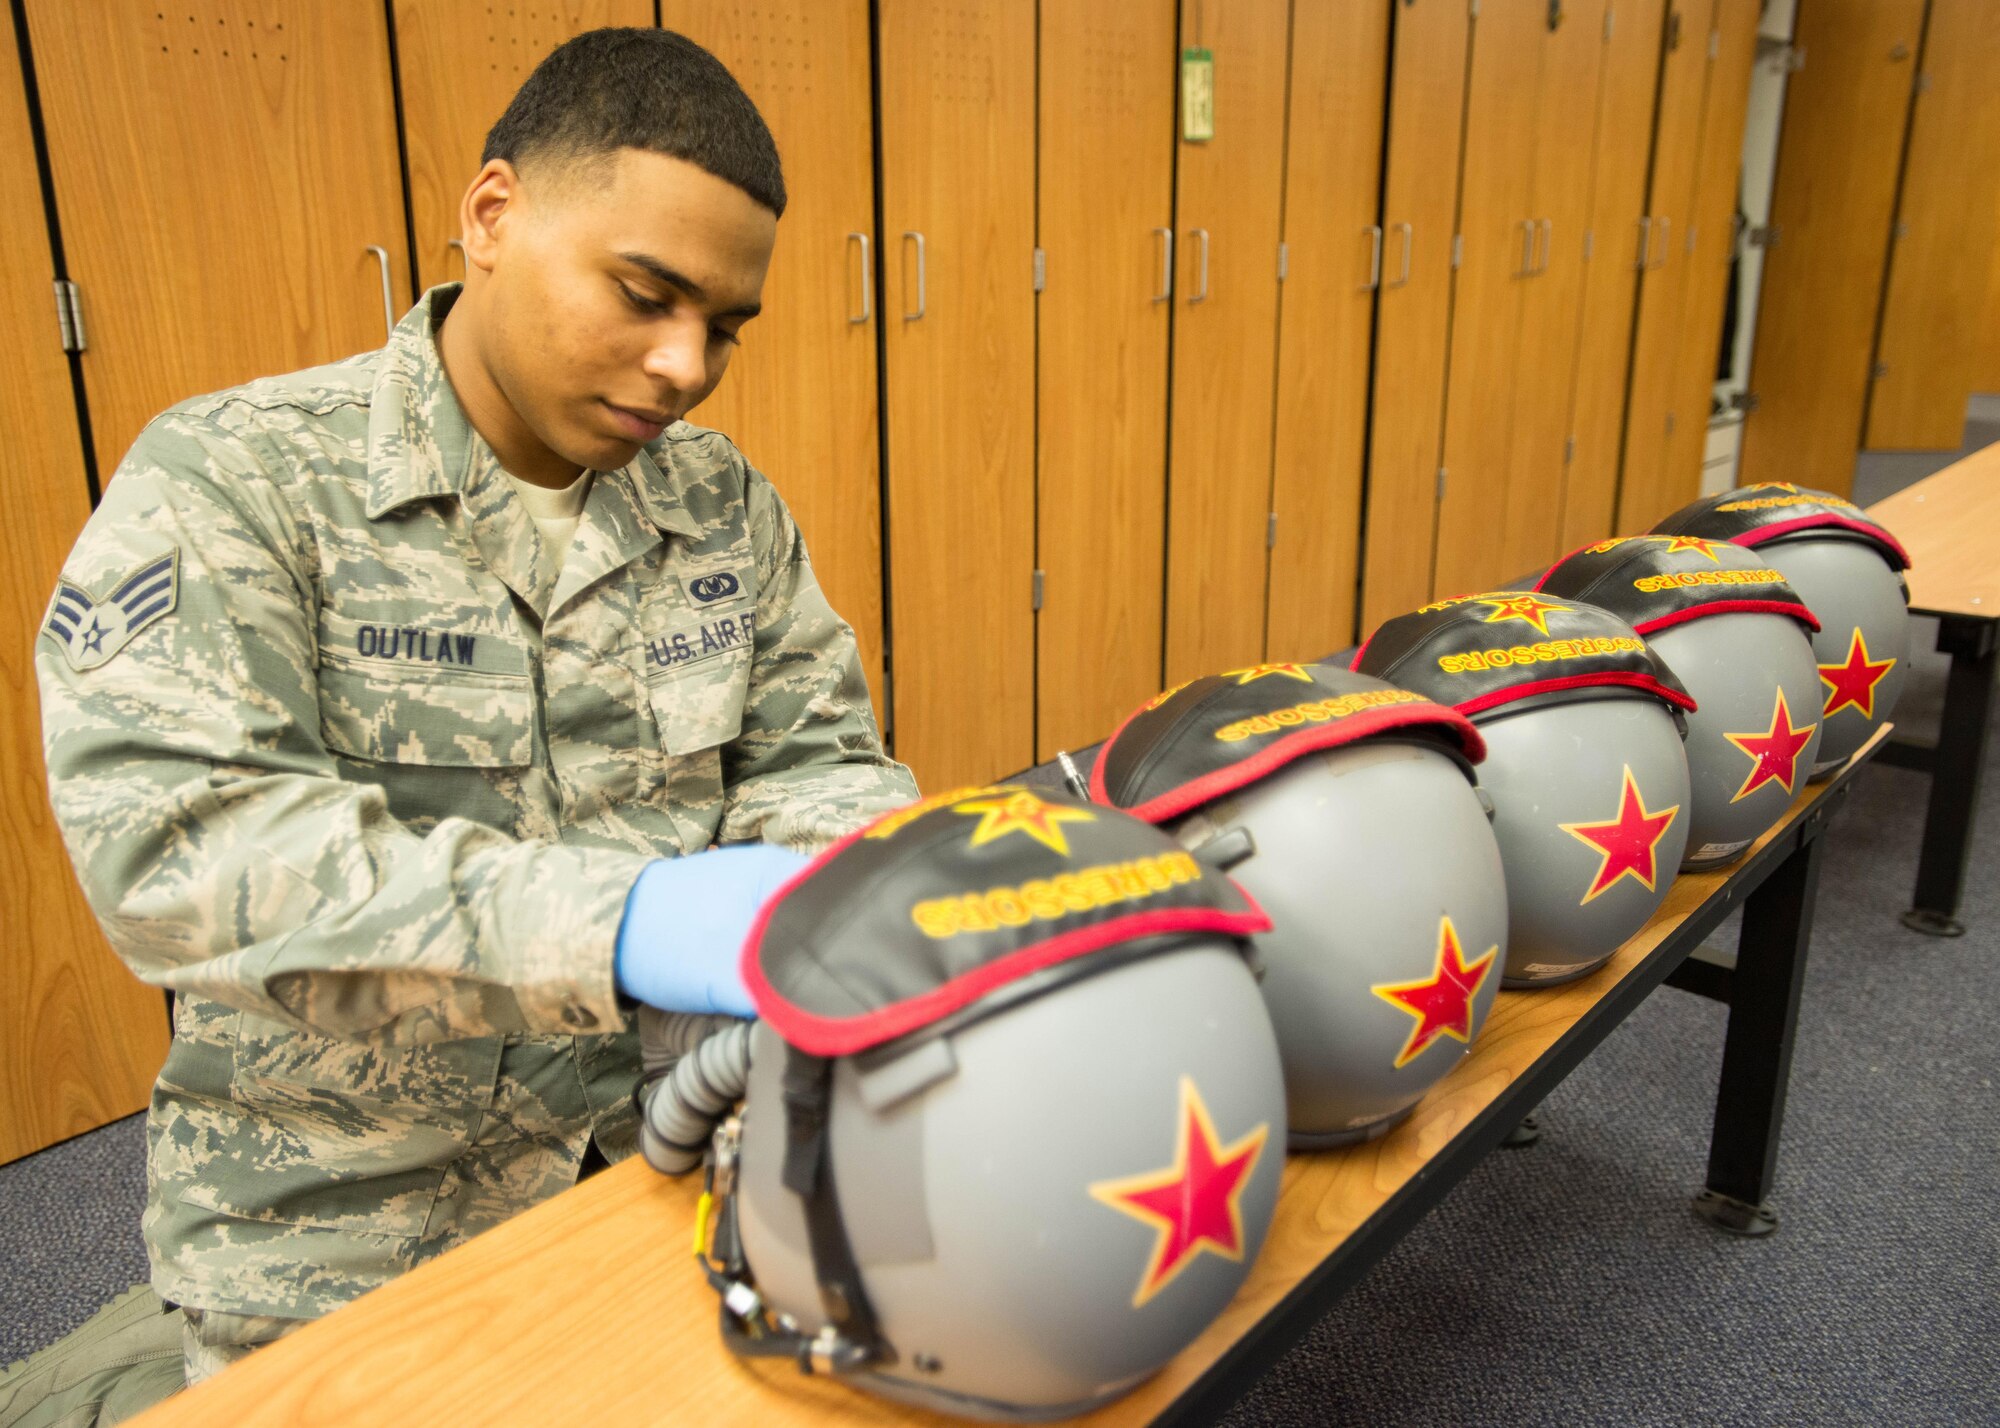 U.S. Air Force Senior Airman Demonte Outlaw, a 354th Operations Support Squadron aircrew flight equipment journeyman, maintains helmets used by pilots with the 18th Aggressor Squadron (AGRS), June 15, 2016, during RED FLAG-Alaska (RF-A) 16-2 at Eielson Air Force Base, Alaska. The 18th AGRS use a red star on their helmets to mark the mission of being experts in enemy tactics in exercises such as RF-A, a U.S. Pacific Air Forces commander-directed exercise, which has helped train more than 150,000 aircrew members for combat in the past 40 years. (U.S. Air Force photo by Staff Sgt. Shawn Nickel/Released)
